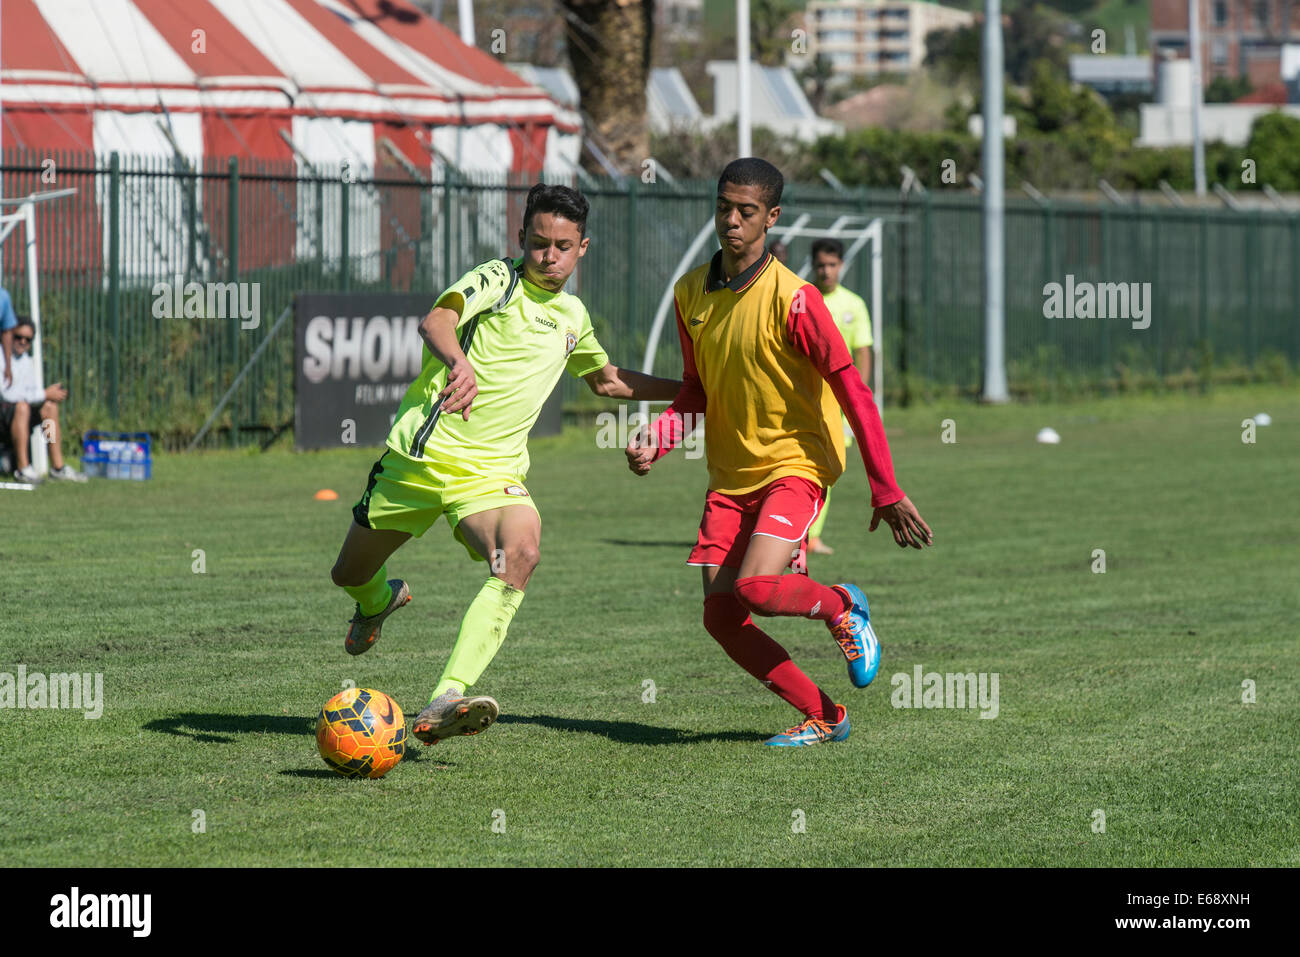 Players in football match of Under 15 youth teams, Cape Town, South Africa Stock Photo